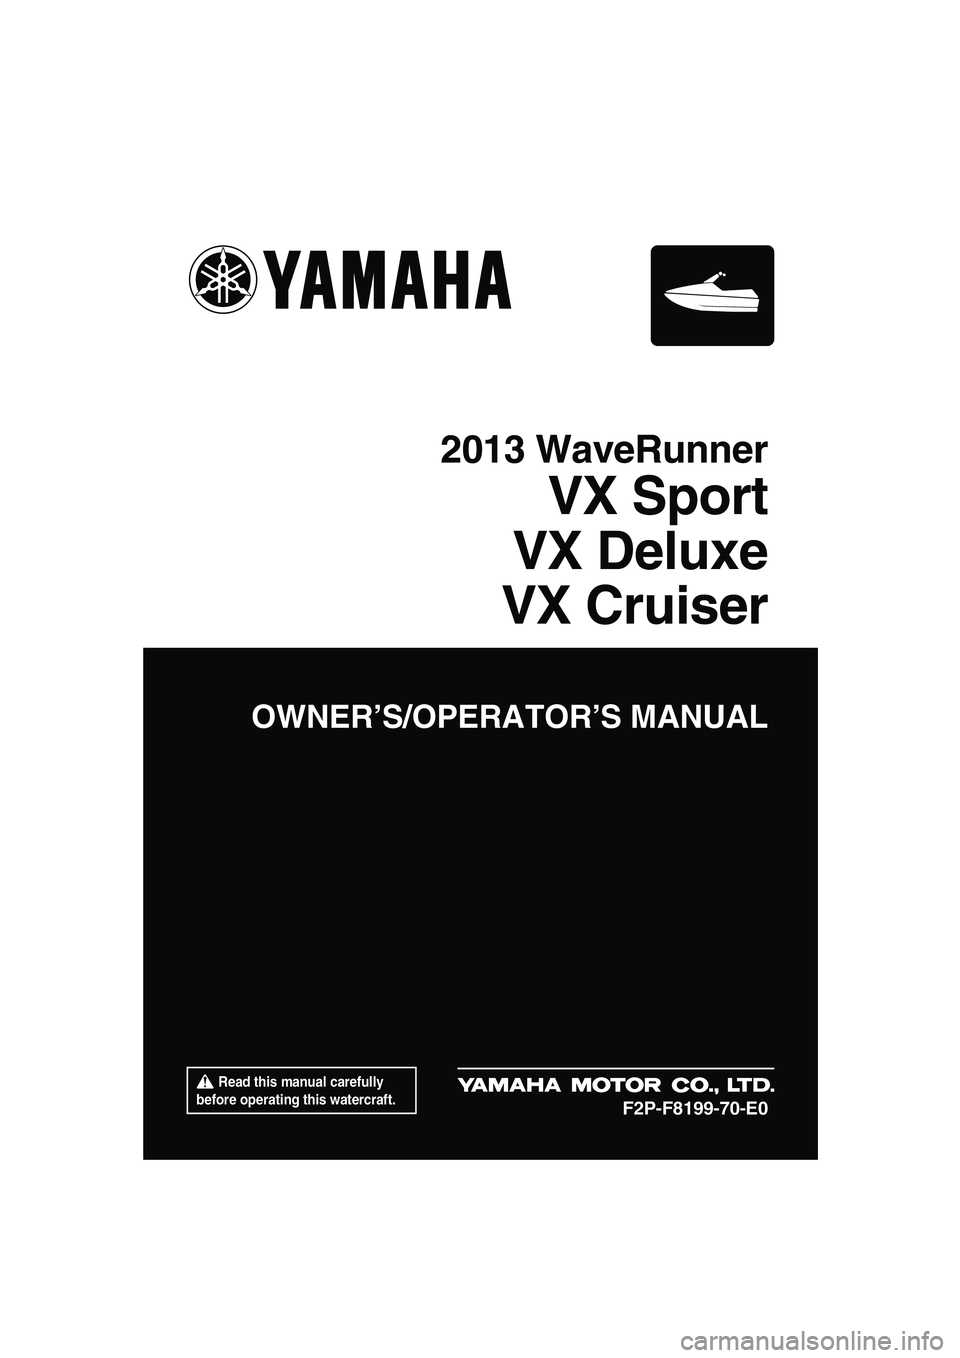 YAMAHA VX SPORT 2013  Owners Manual  Read this manual carefully 
before operating this watercraft.
OWNER’S/OPERATOR’S MANUAL
2013 WaveRunner
VX Sport
VX Deluxe
VX Cruiser
F2P-F8199-70-E0
UF2P70E0.book  Page 1  Tuesday, July 31, 2012